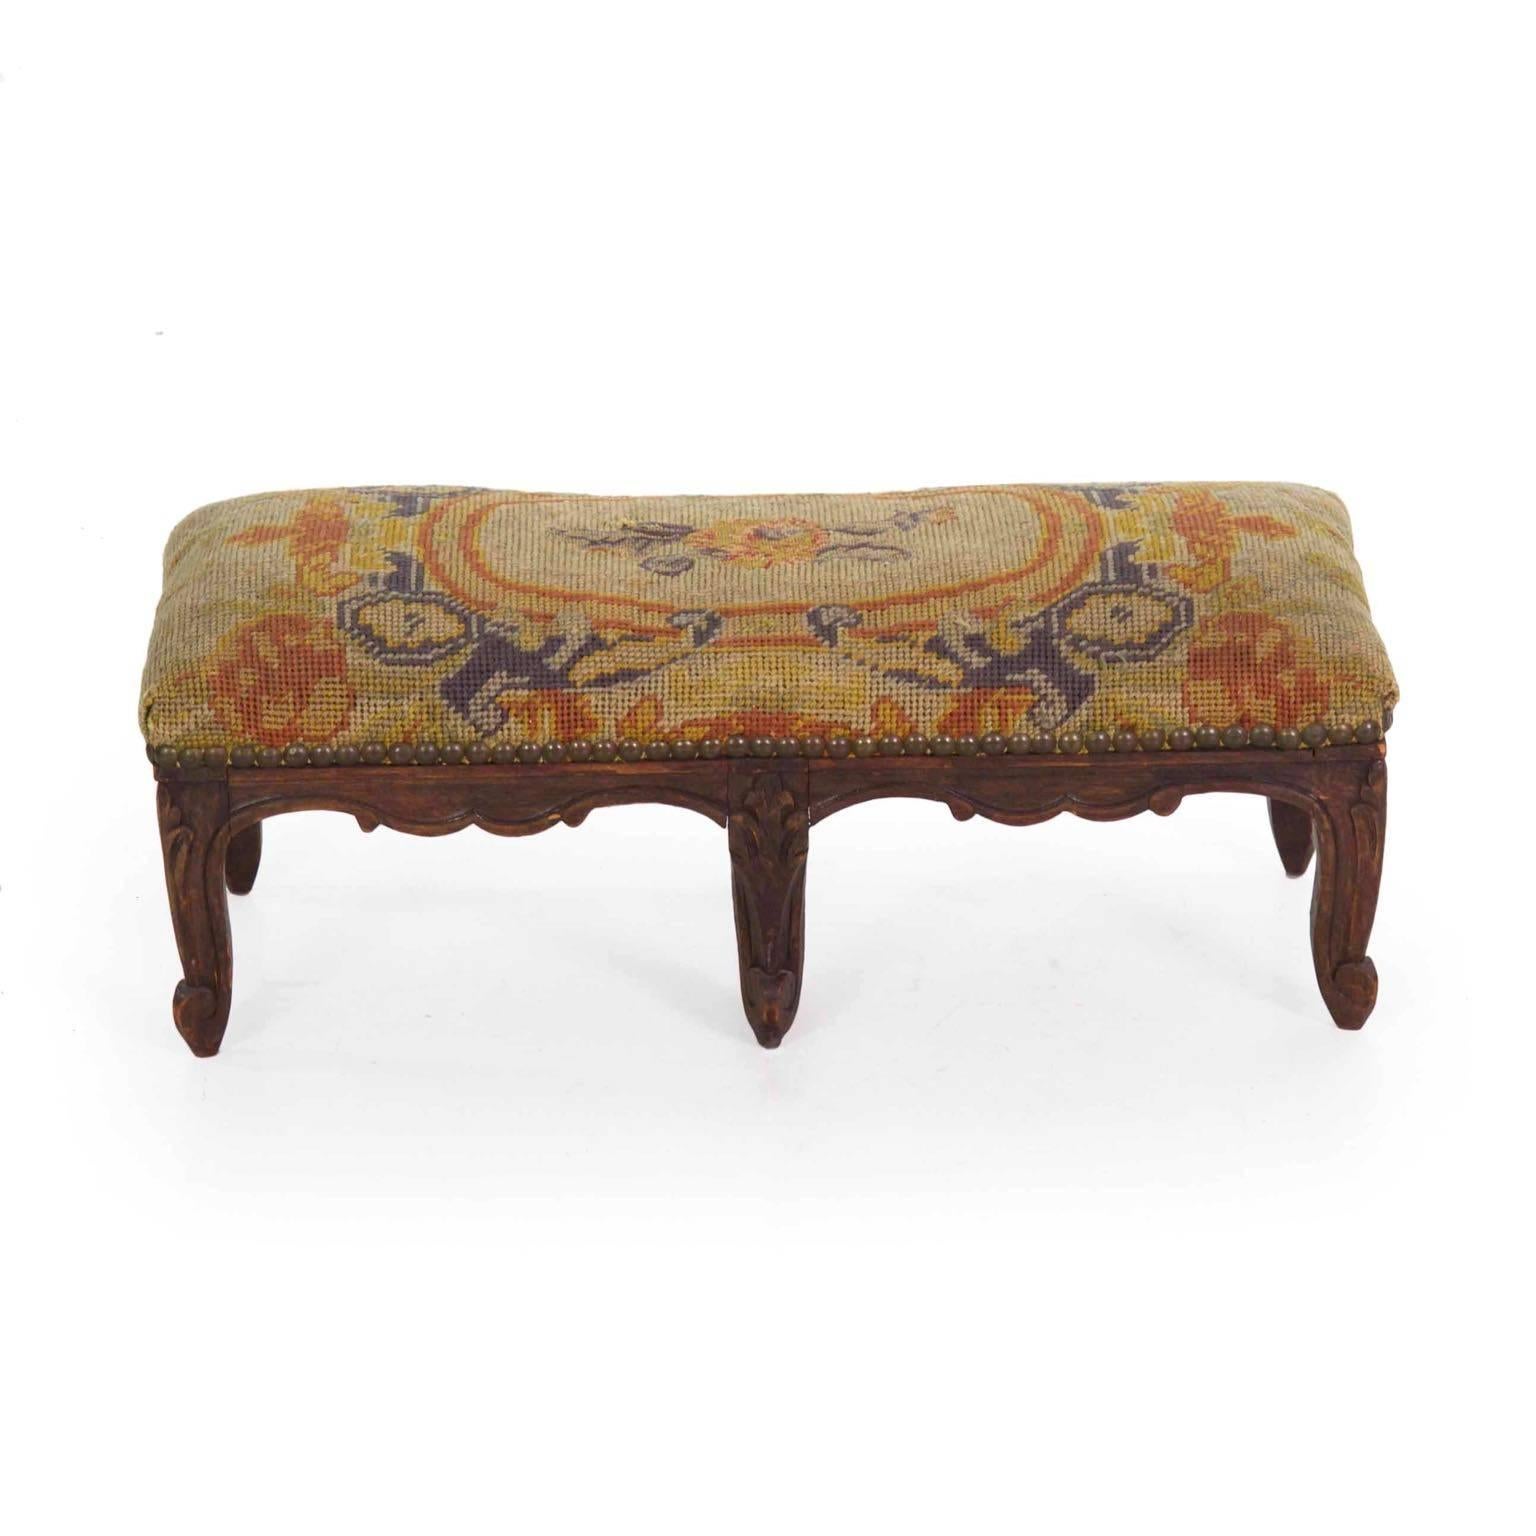 A gorgeous little early footstool of unusually diminutive proportions, this is an interesting accent piece with such a rich old surface. Retaining the early hand-stitched needlepoint covering surrounded by brass tacking, the fruitwood frame is